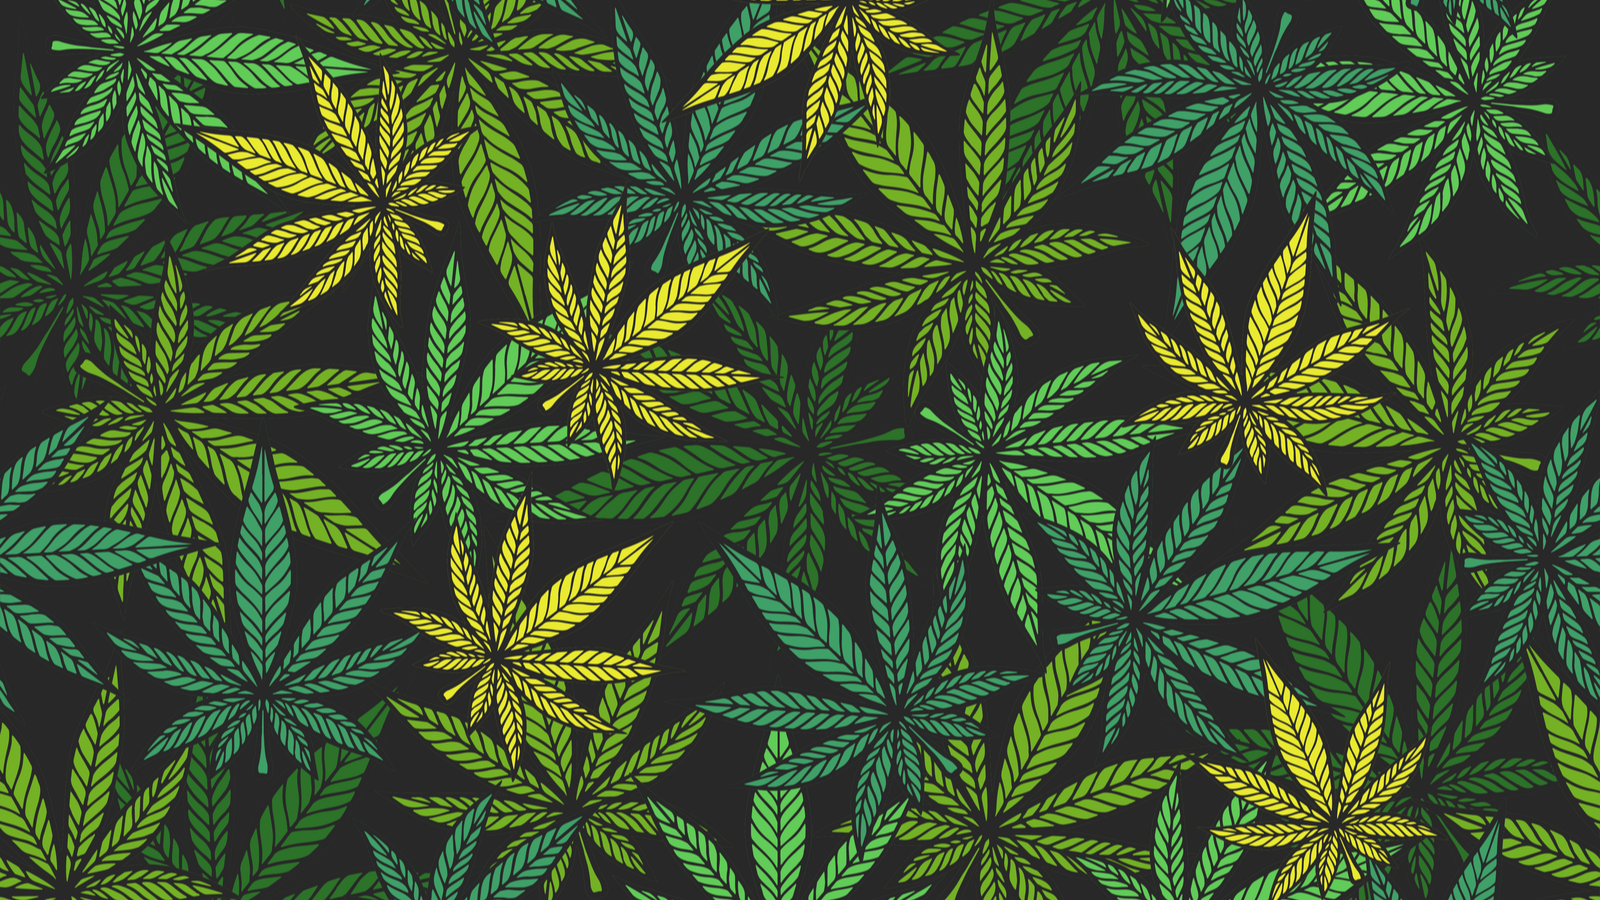 Marijuana leaves on different colors of green and yellow on a black background representing the HITI stock.